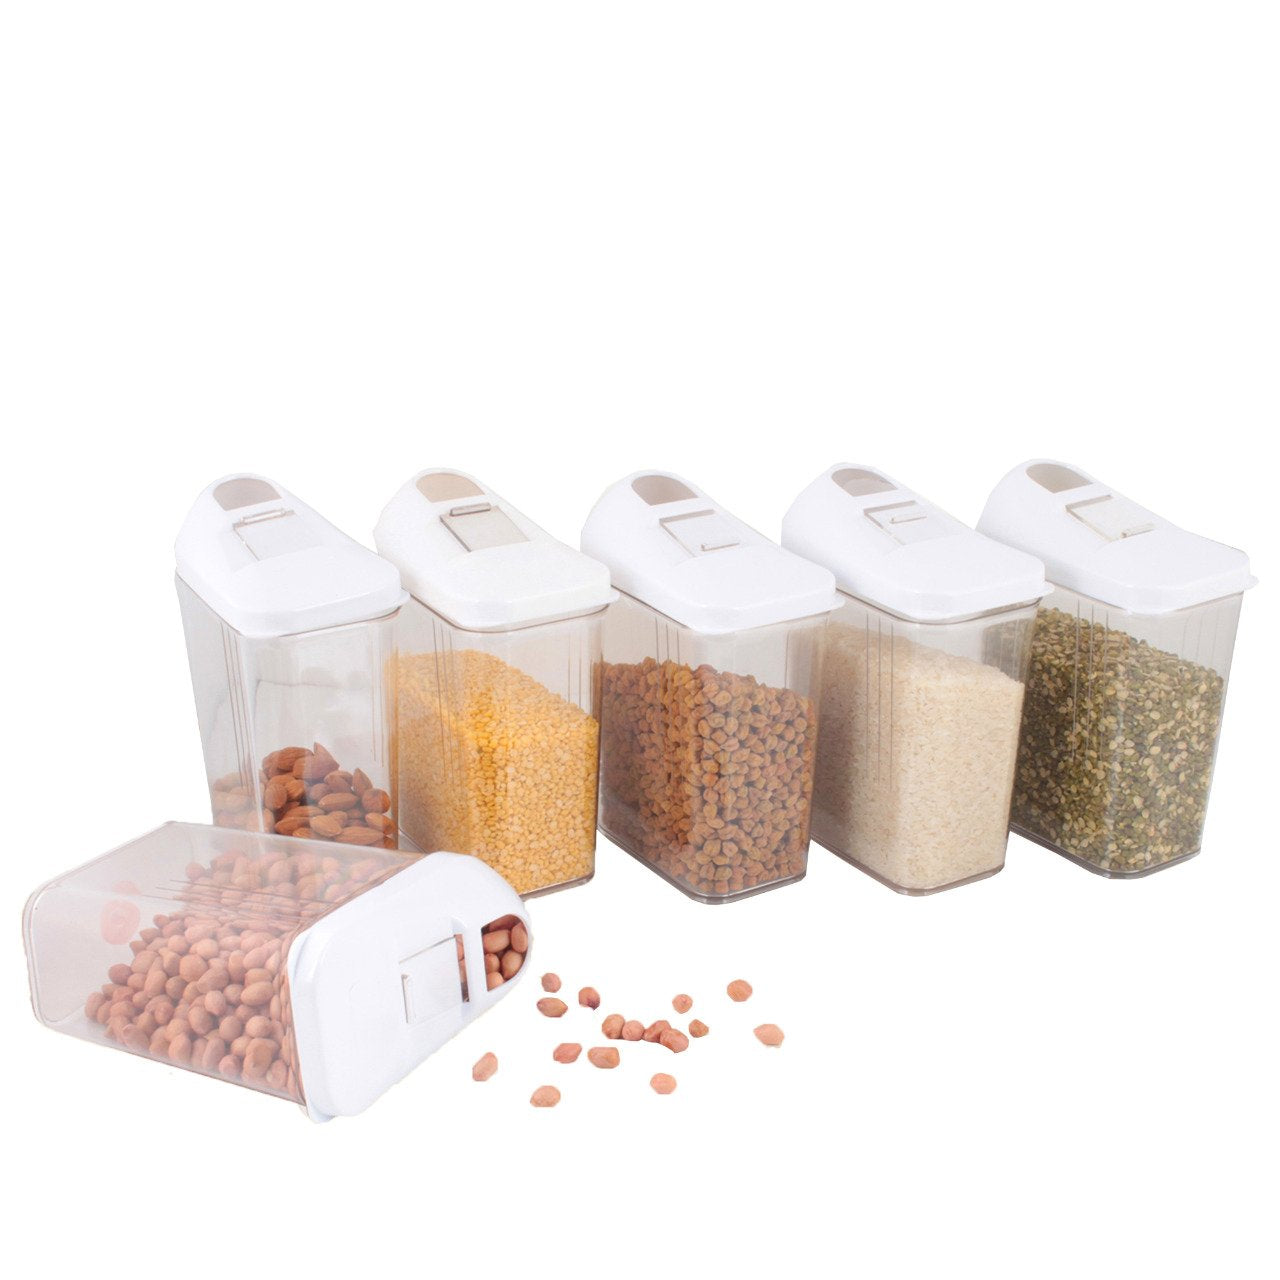 2401 Plastic Storage Containers with Sliding Mouth (1100 ml) - SkyShopy